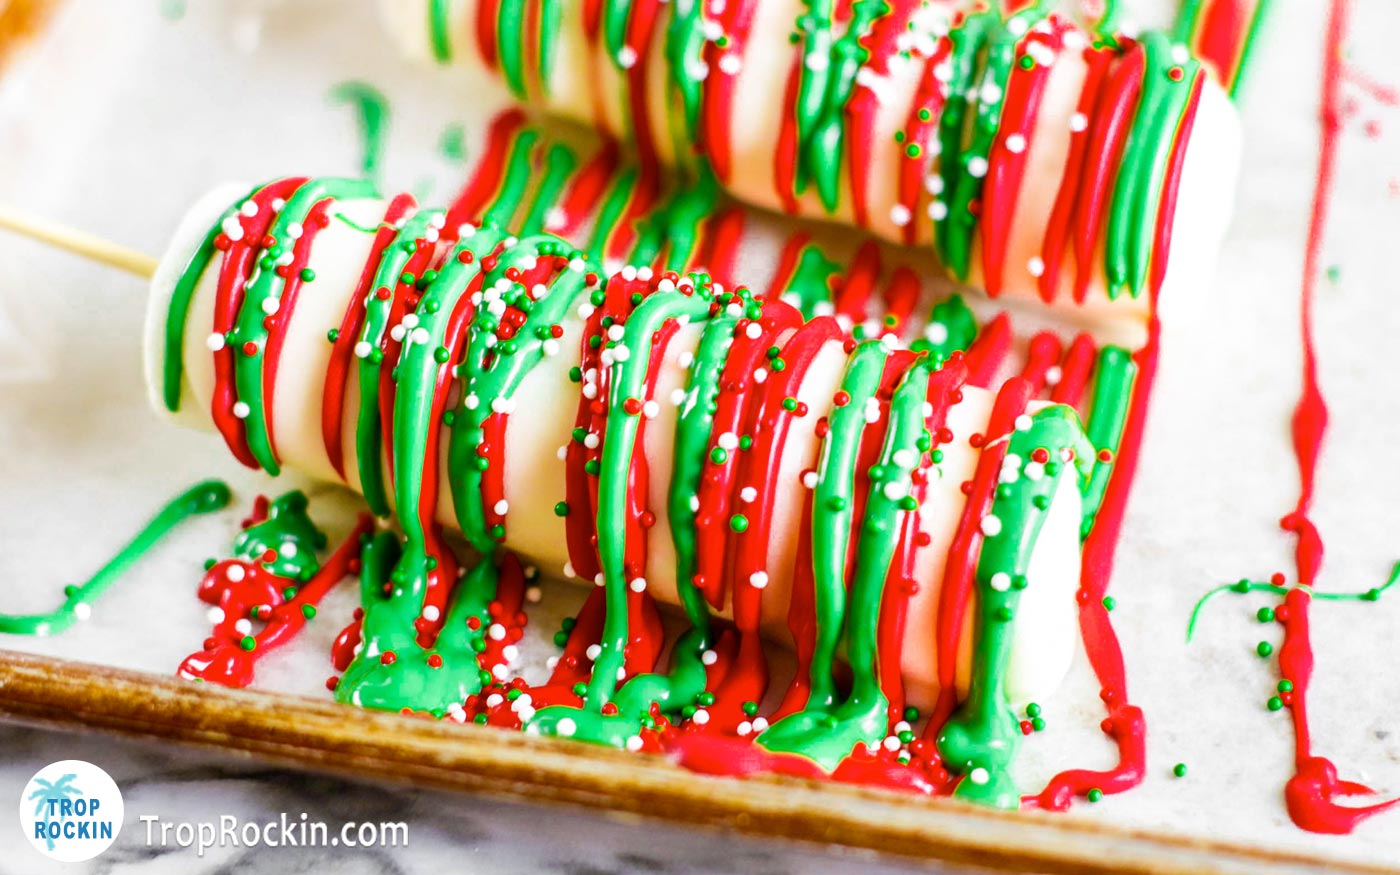 Marshmallow pops drizzled with both melted red and green candy melts and red, white and green Christmas sprinkles on top.